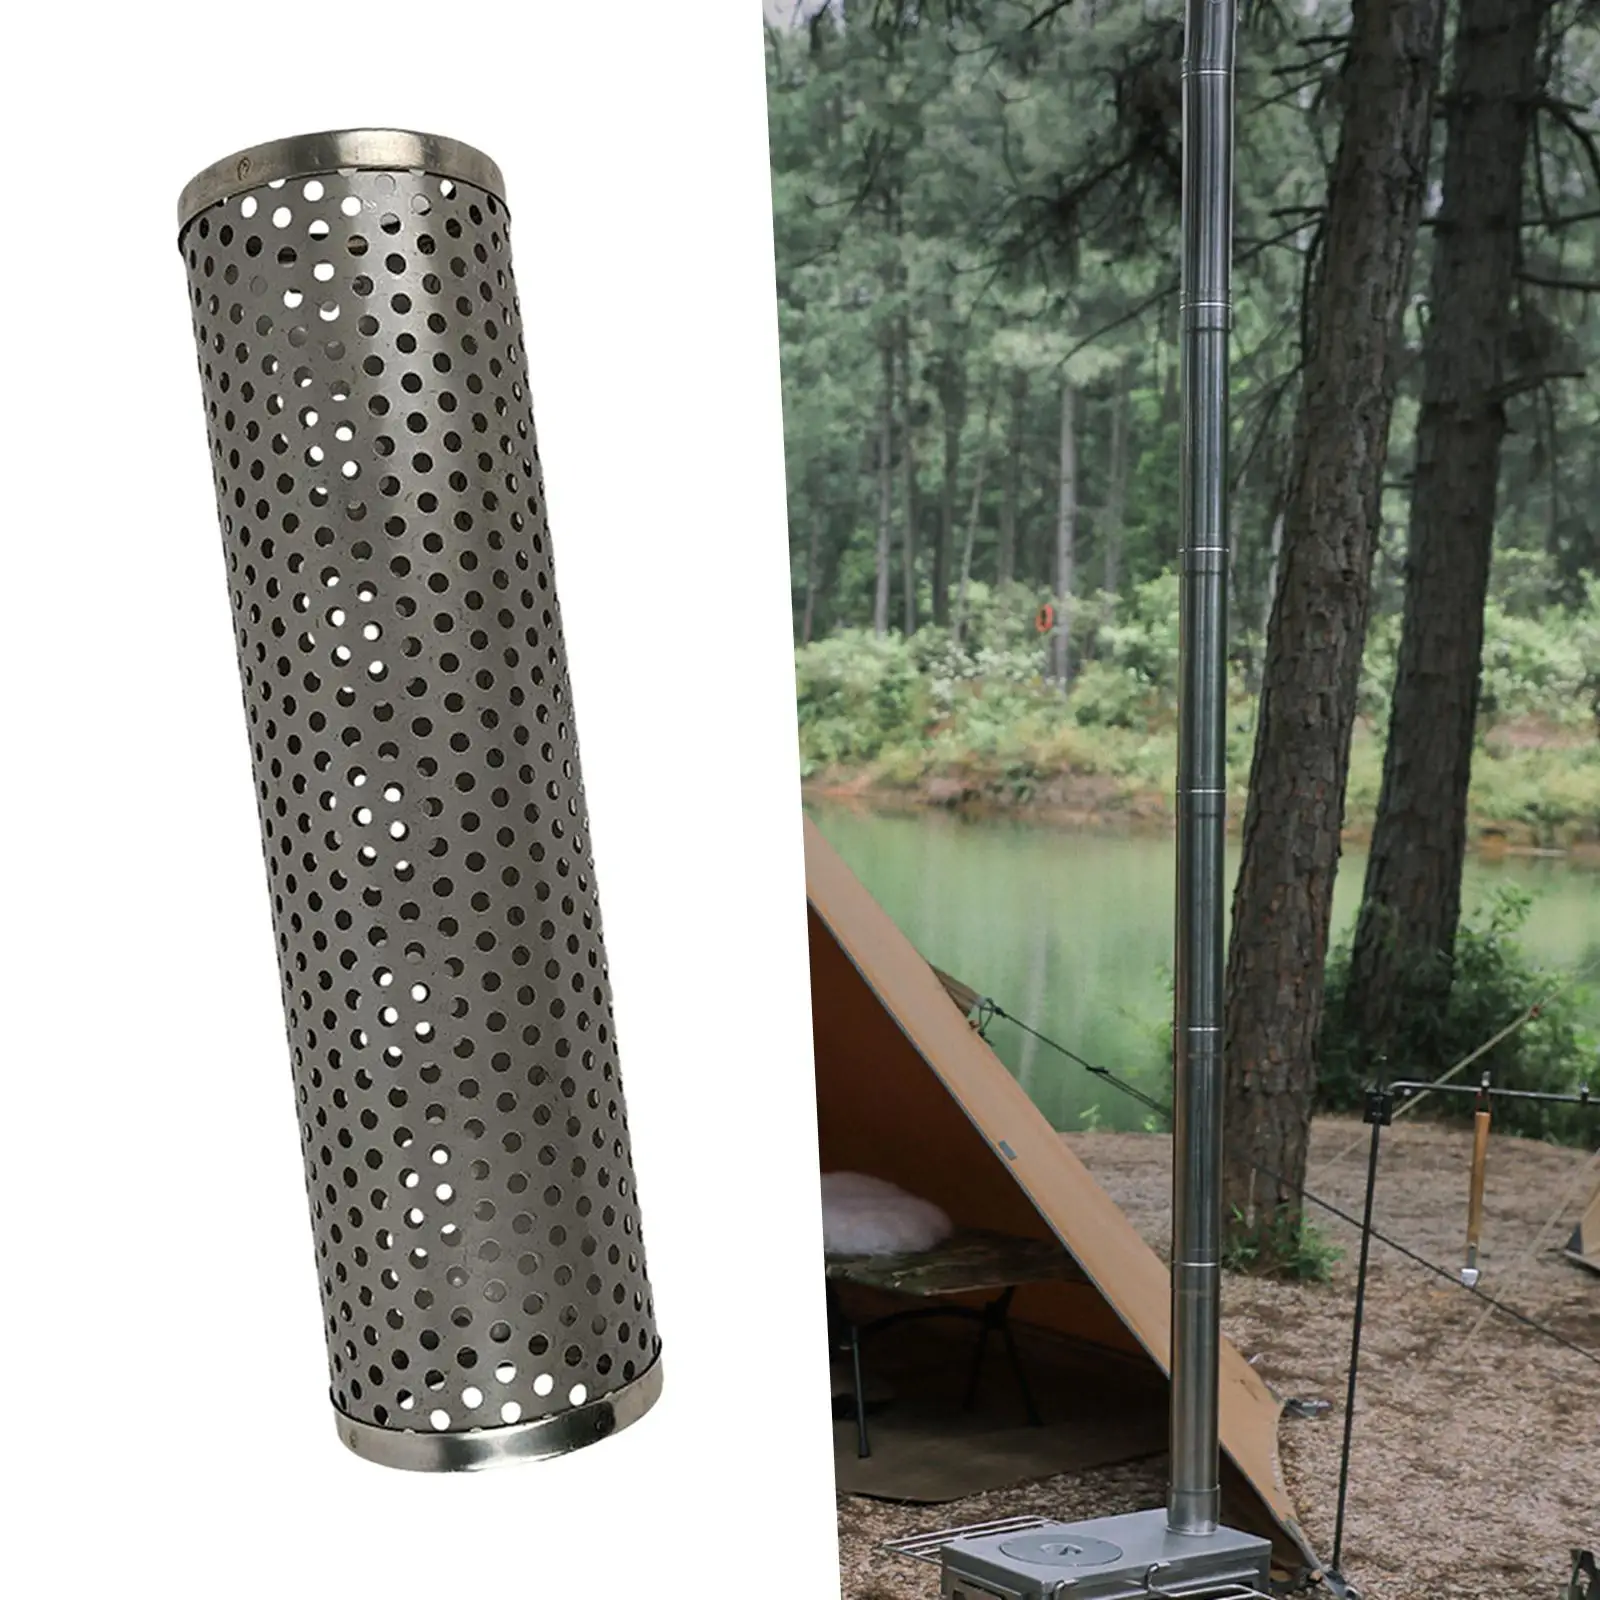 Stove Chimney Pipe Cover Anti Scalding Mesh Cover for Outdoor Camp Stove